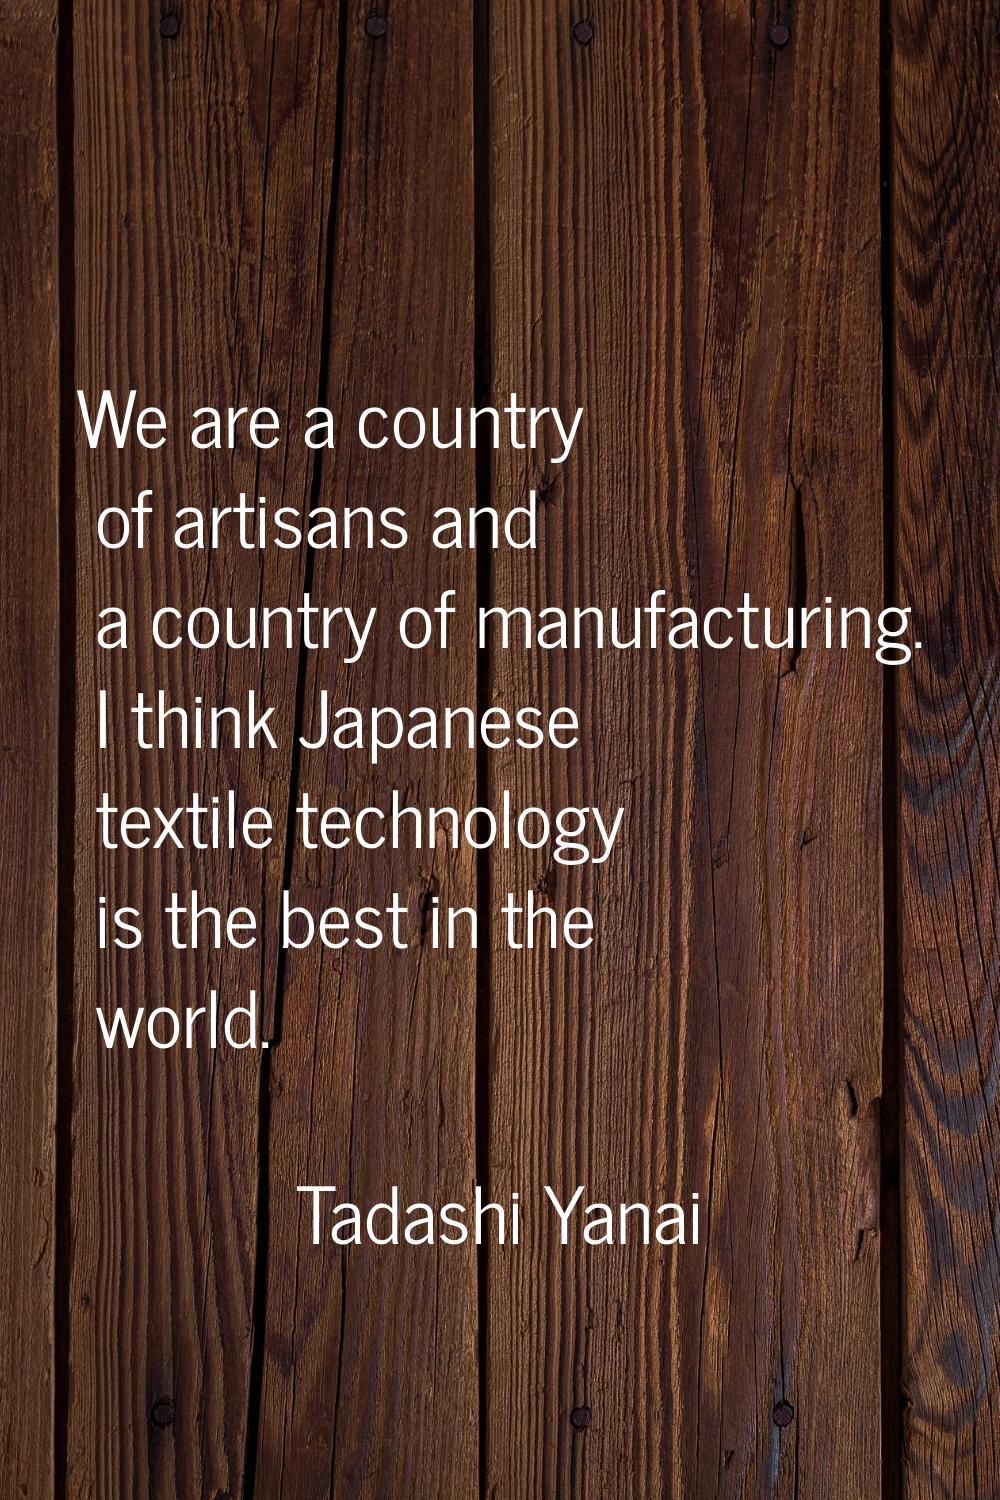 We are a country of artisans and a country of manufacturing. I think Japanese textile technology is